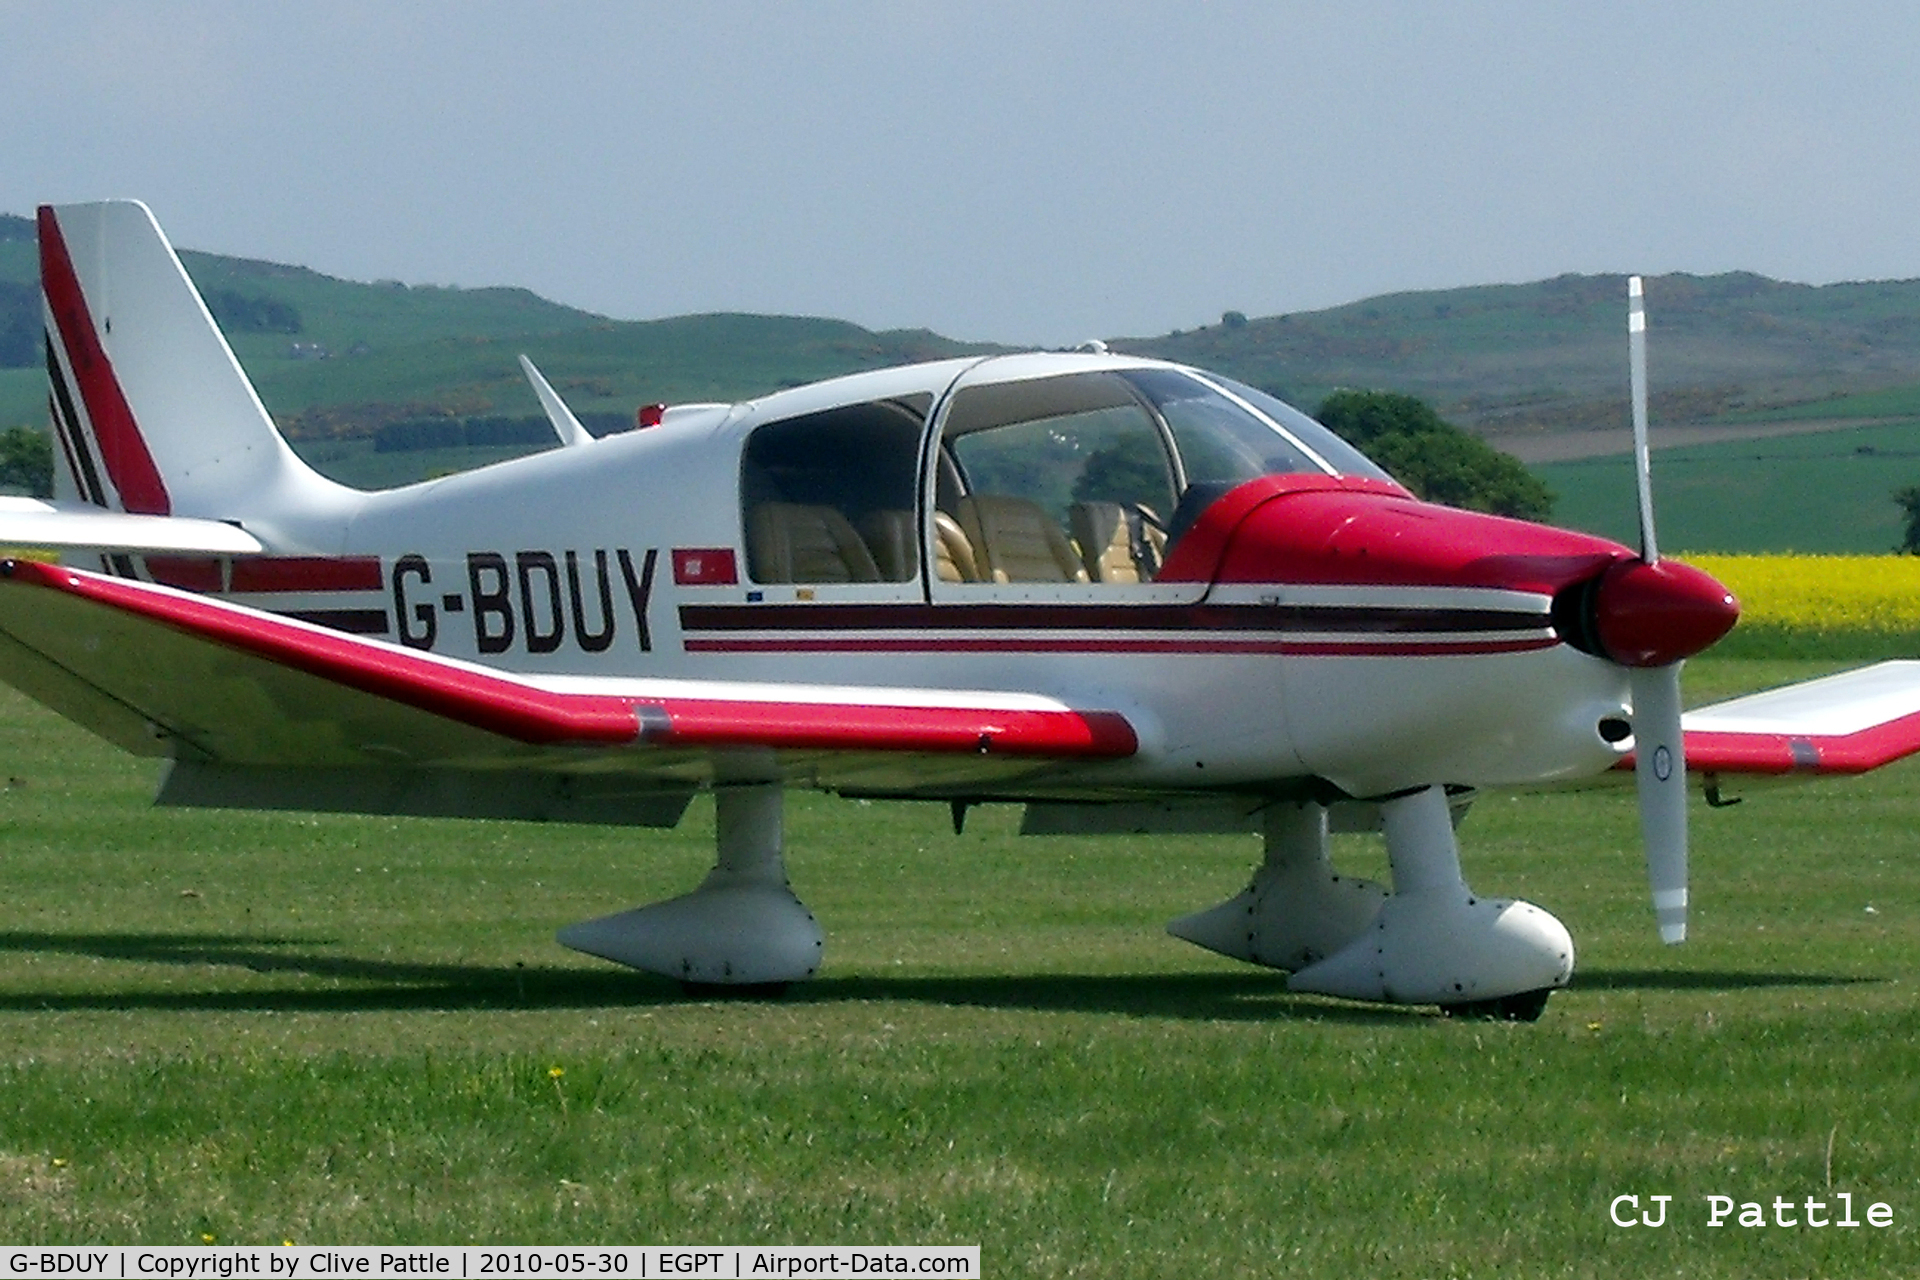 G-BDUY, 1976 Robin DR-400-140B Major C/N 1120, On display during the Heart of Scotland Airshow held at Perth (Scone) airfield EGPT